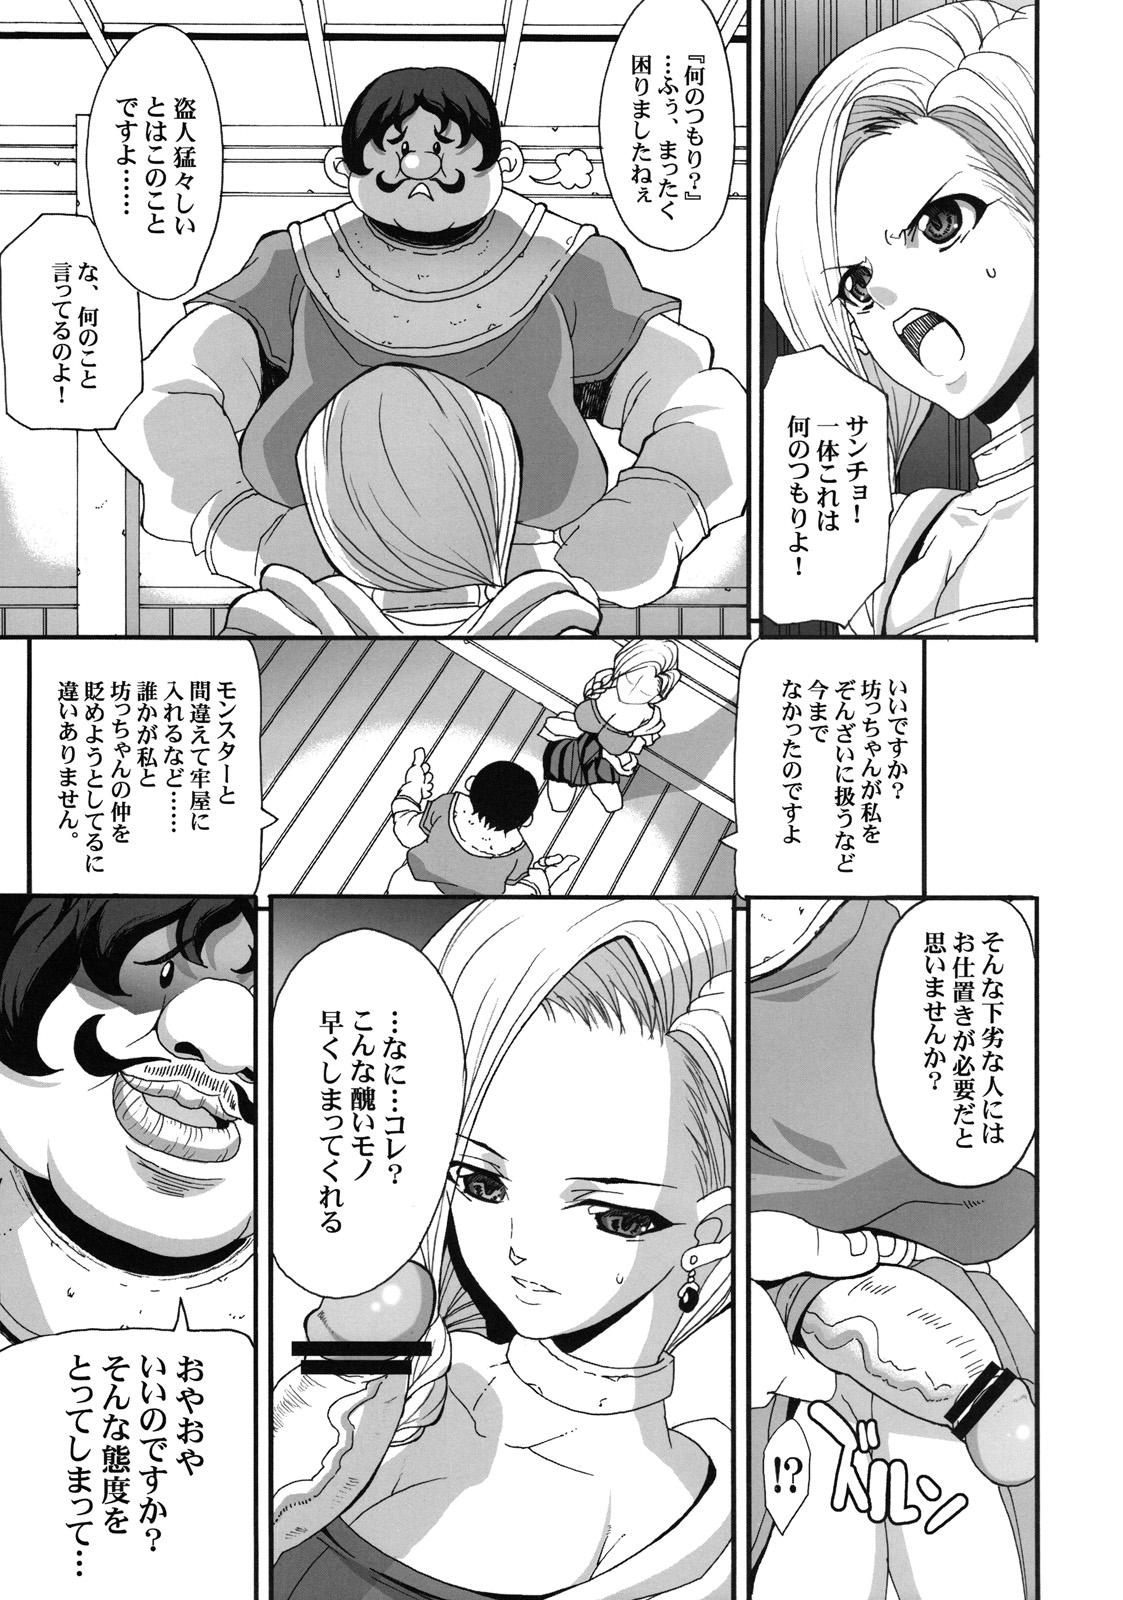 Dominicana The Sancho - Dragon quest v This - Page 7